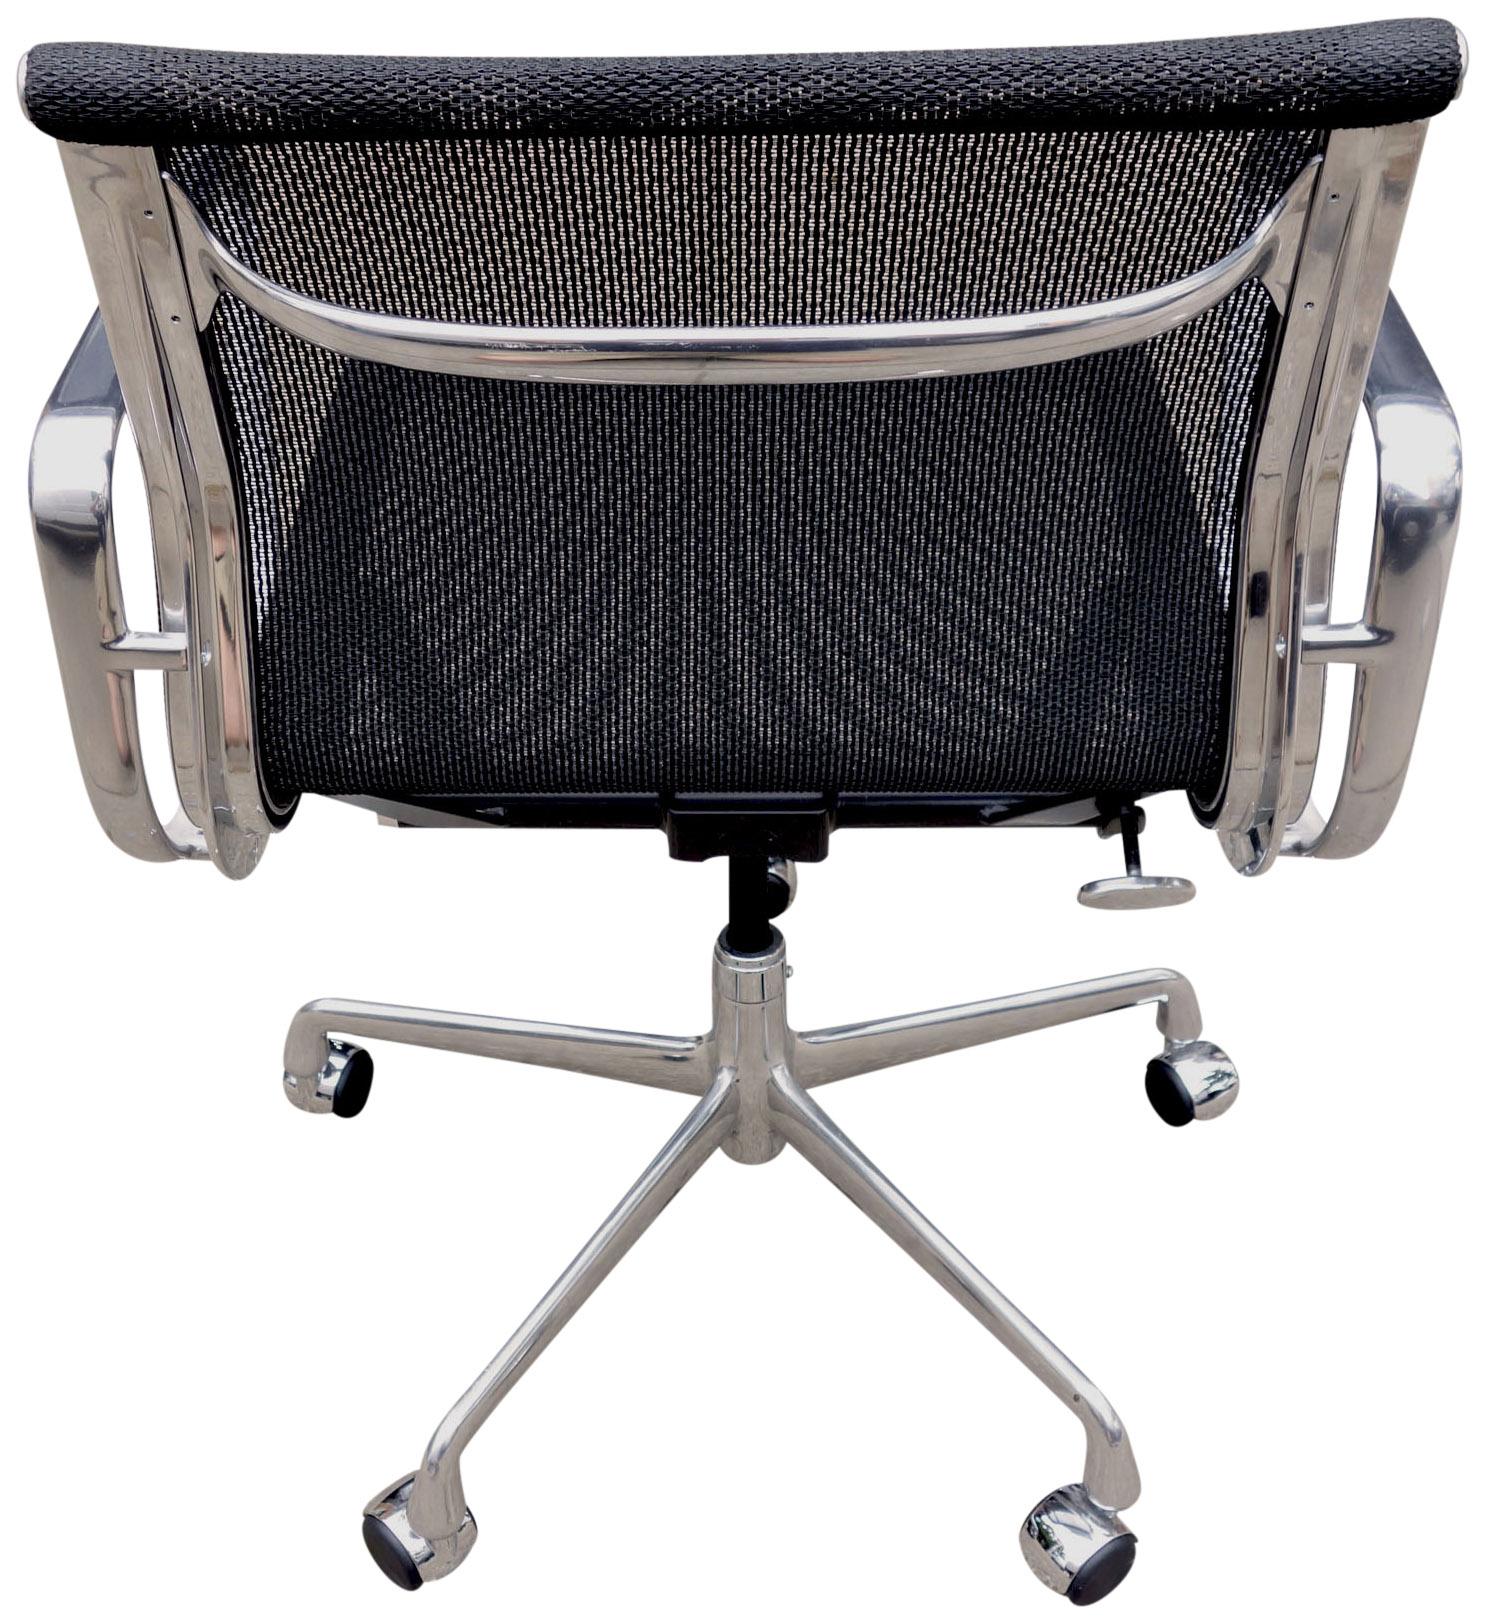 For your consideration are up to 20 aluminium group chairs in black mesh designed by Eames for Herman Miller. All in good original vintage condition showing some minor wear to aluminum with no rips to mesh. With tilt and height adjustment.